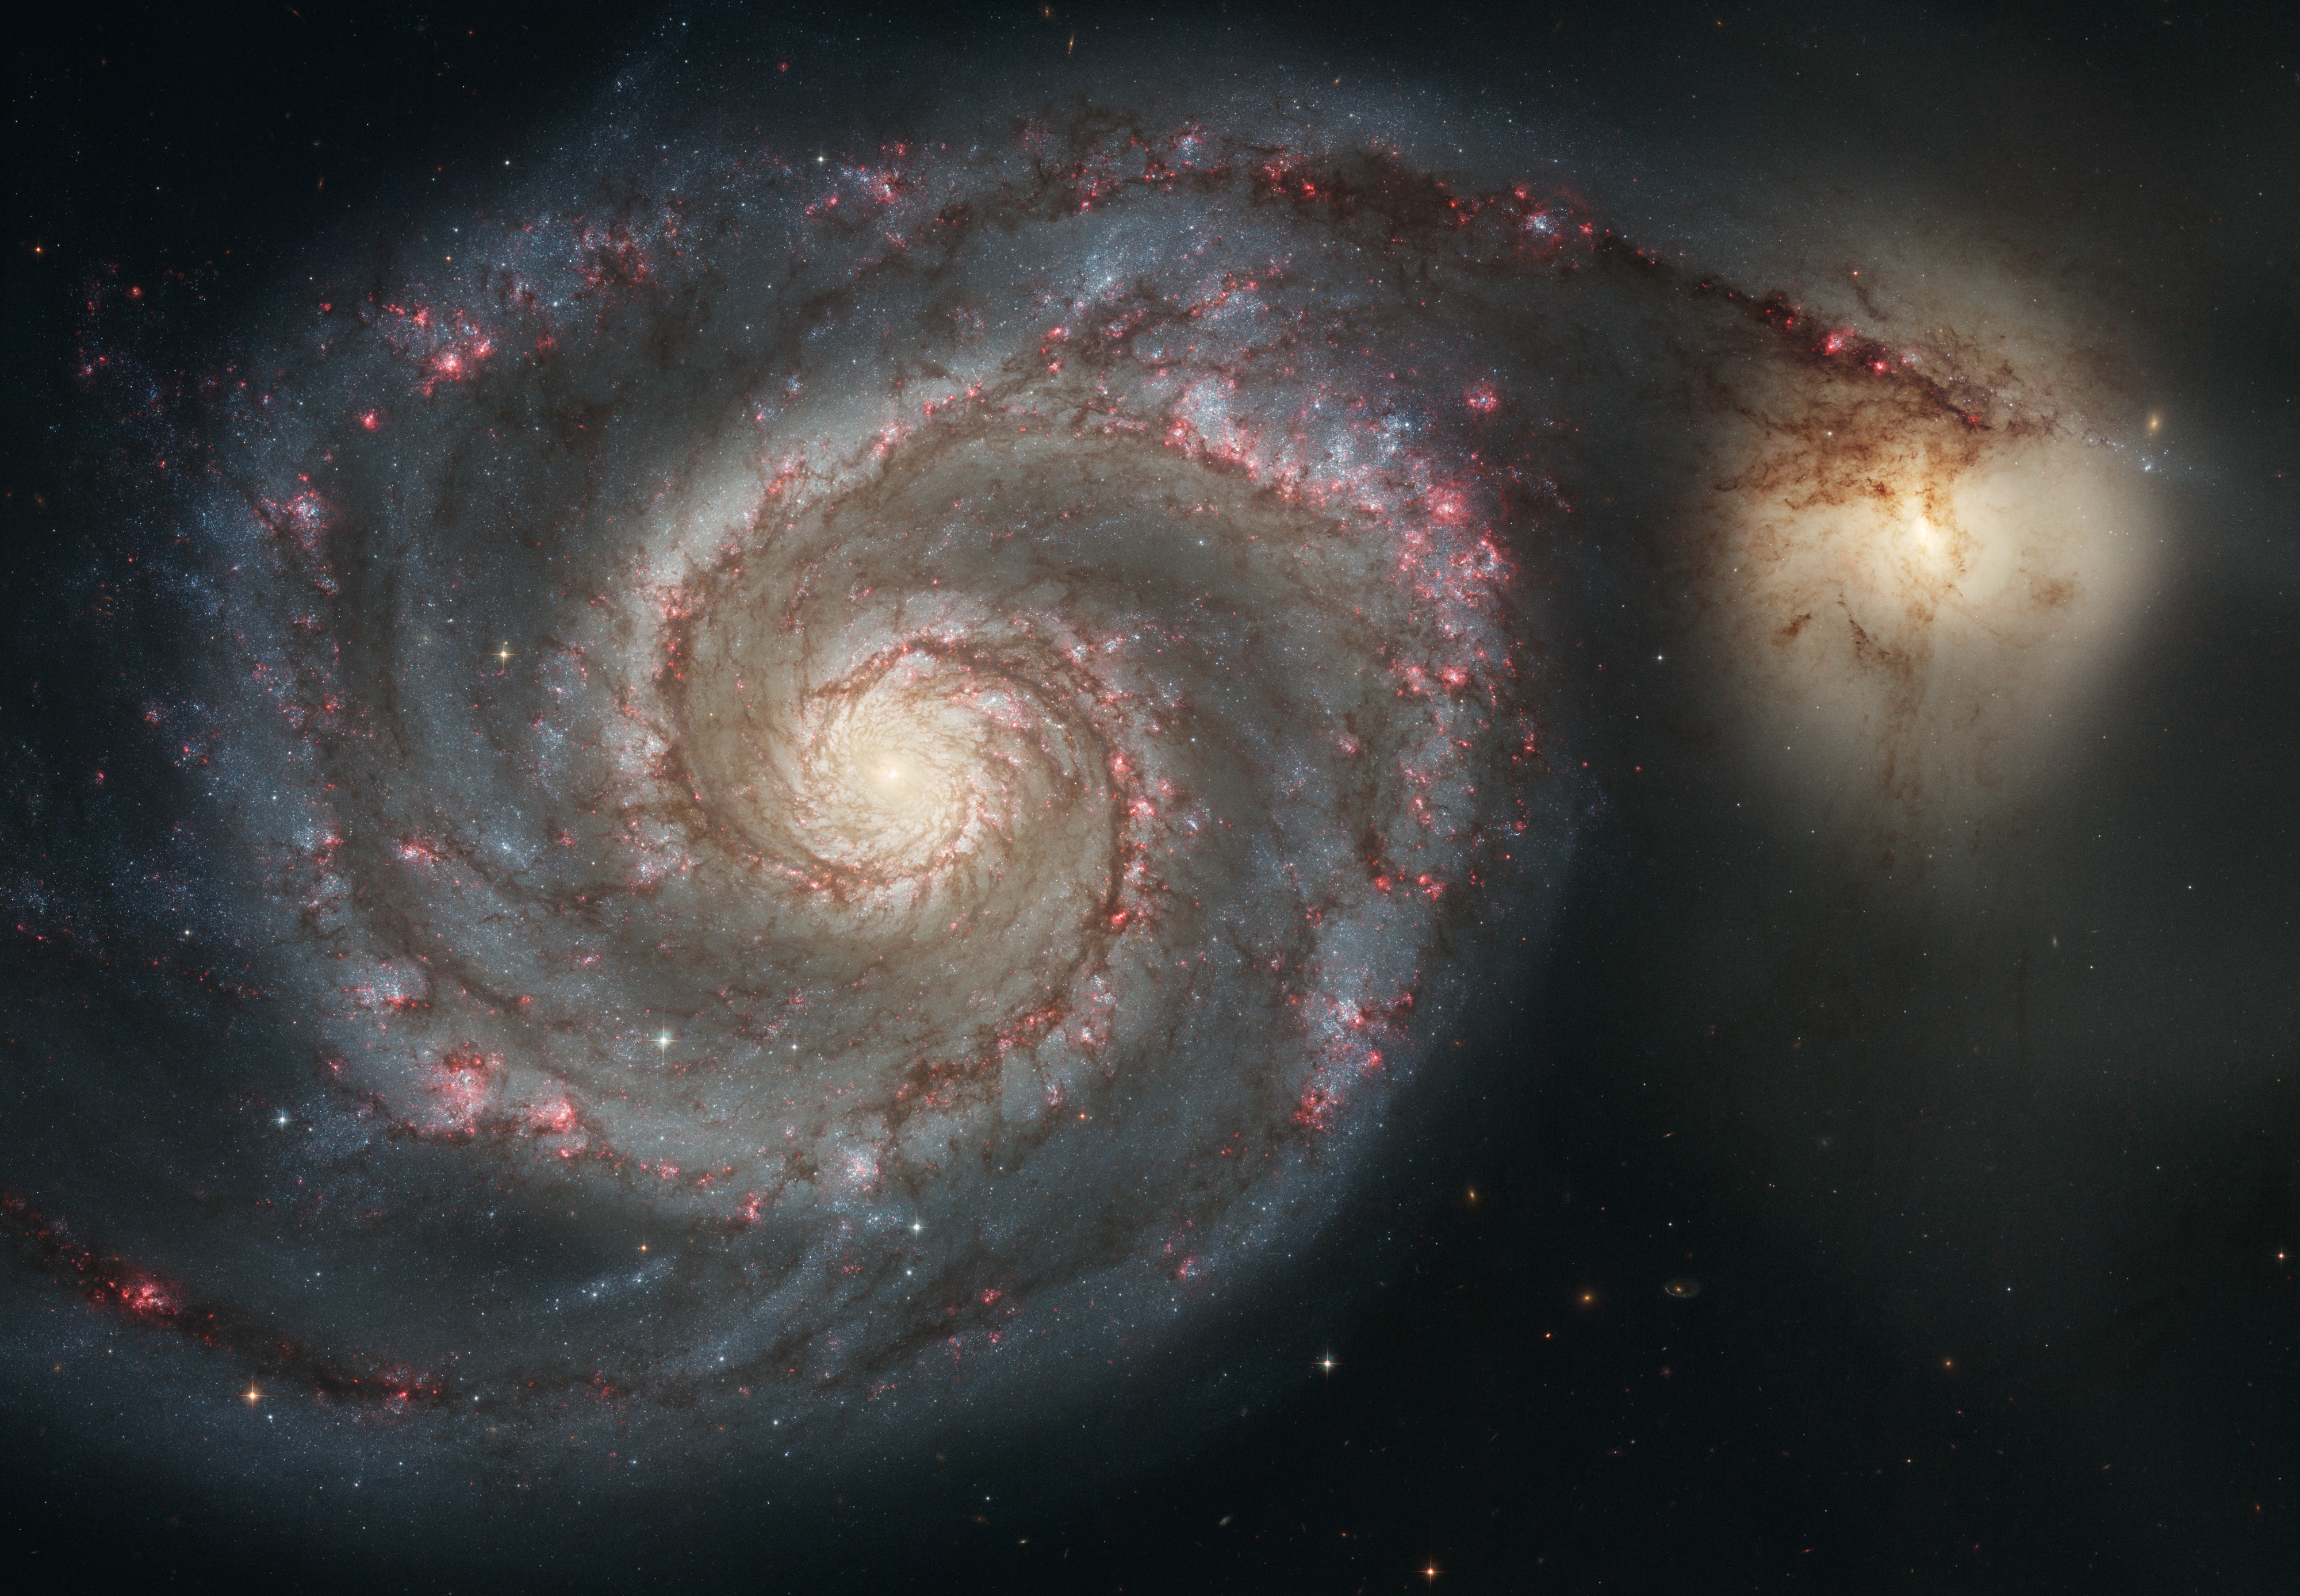 Out of this whirl: The Whirlpool Galaxy (M51) and companion galaxy by NASA